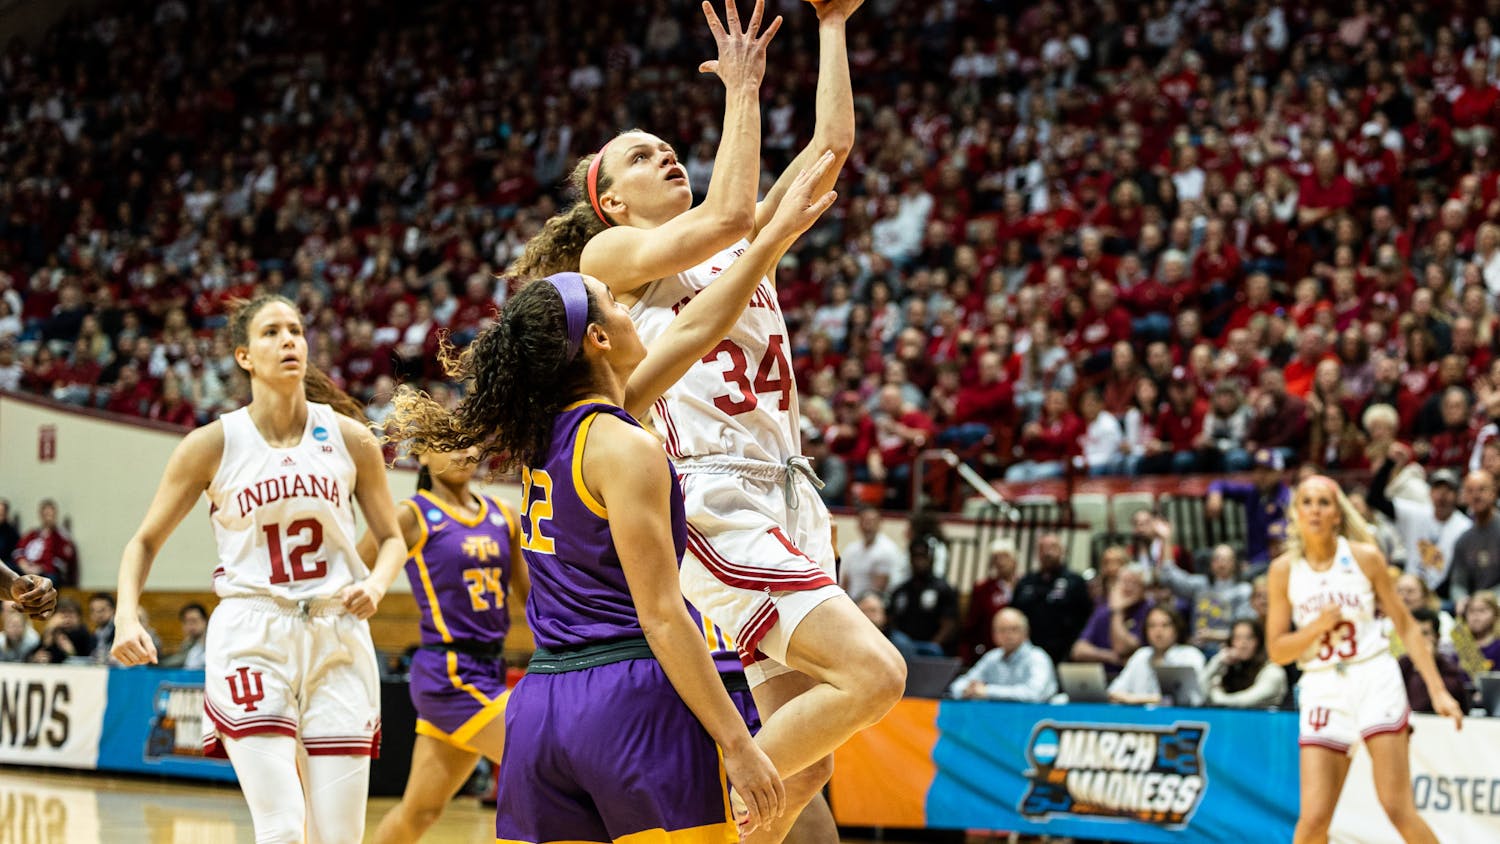 Photos: No. 1 Indiana rolls past No. 16 Tennessee Tech